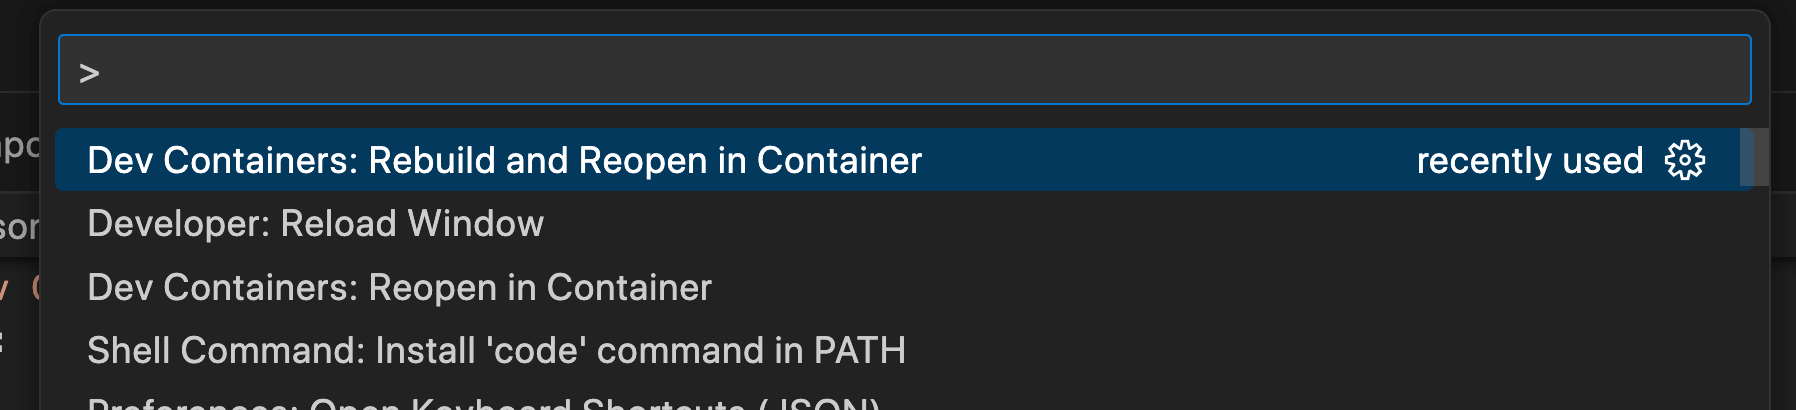 Dev Containers: Rebuild and Reopen in Container